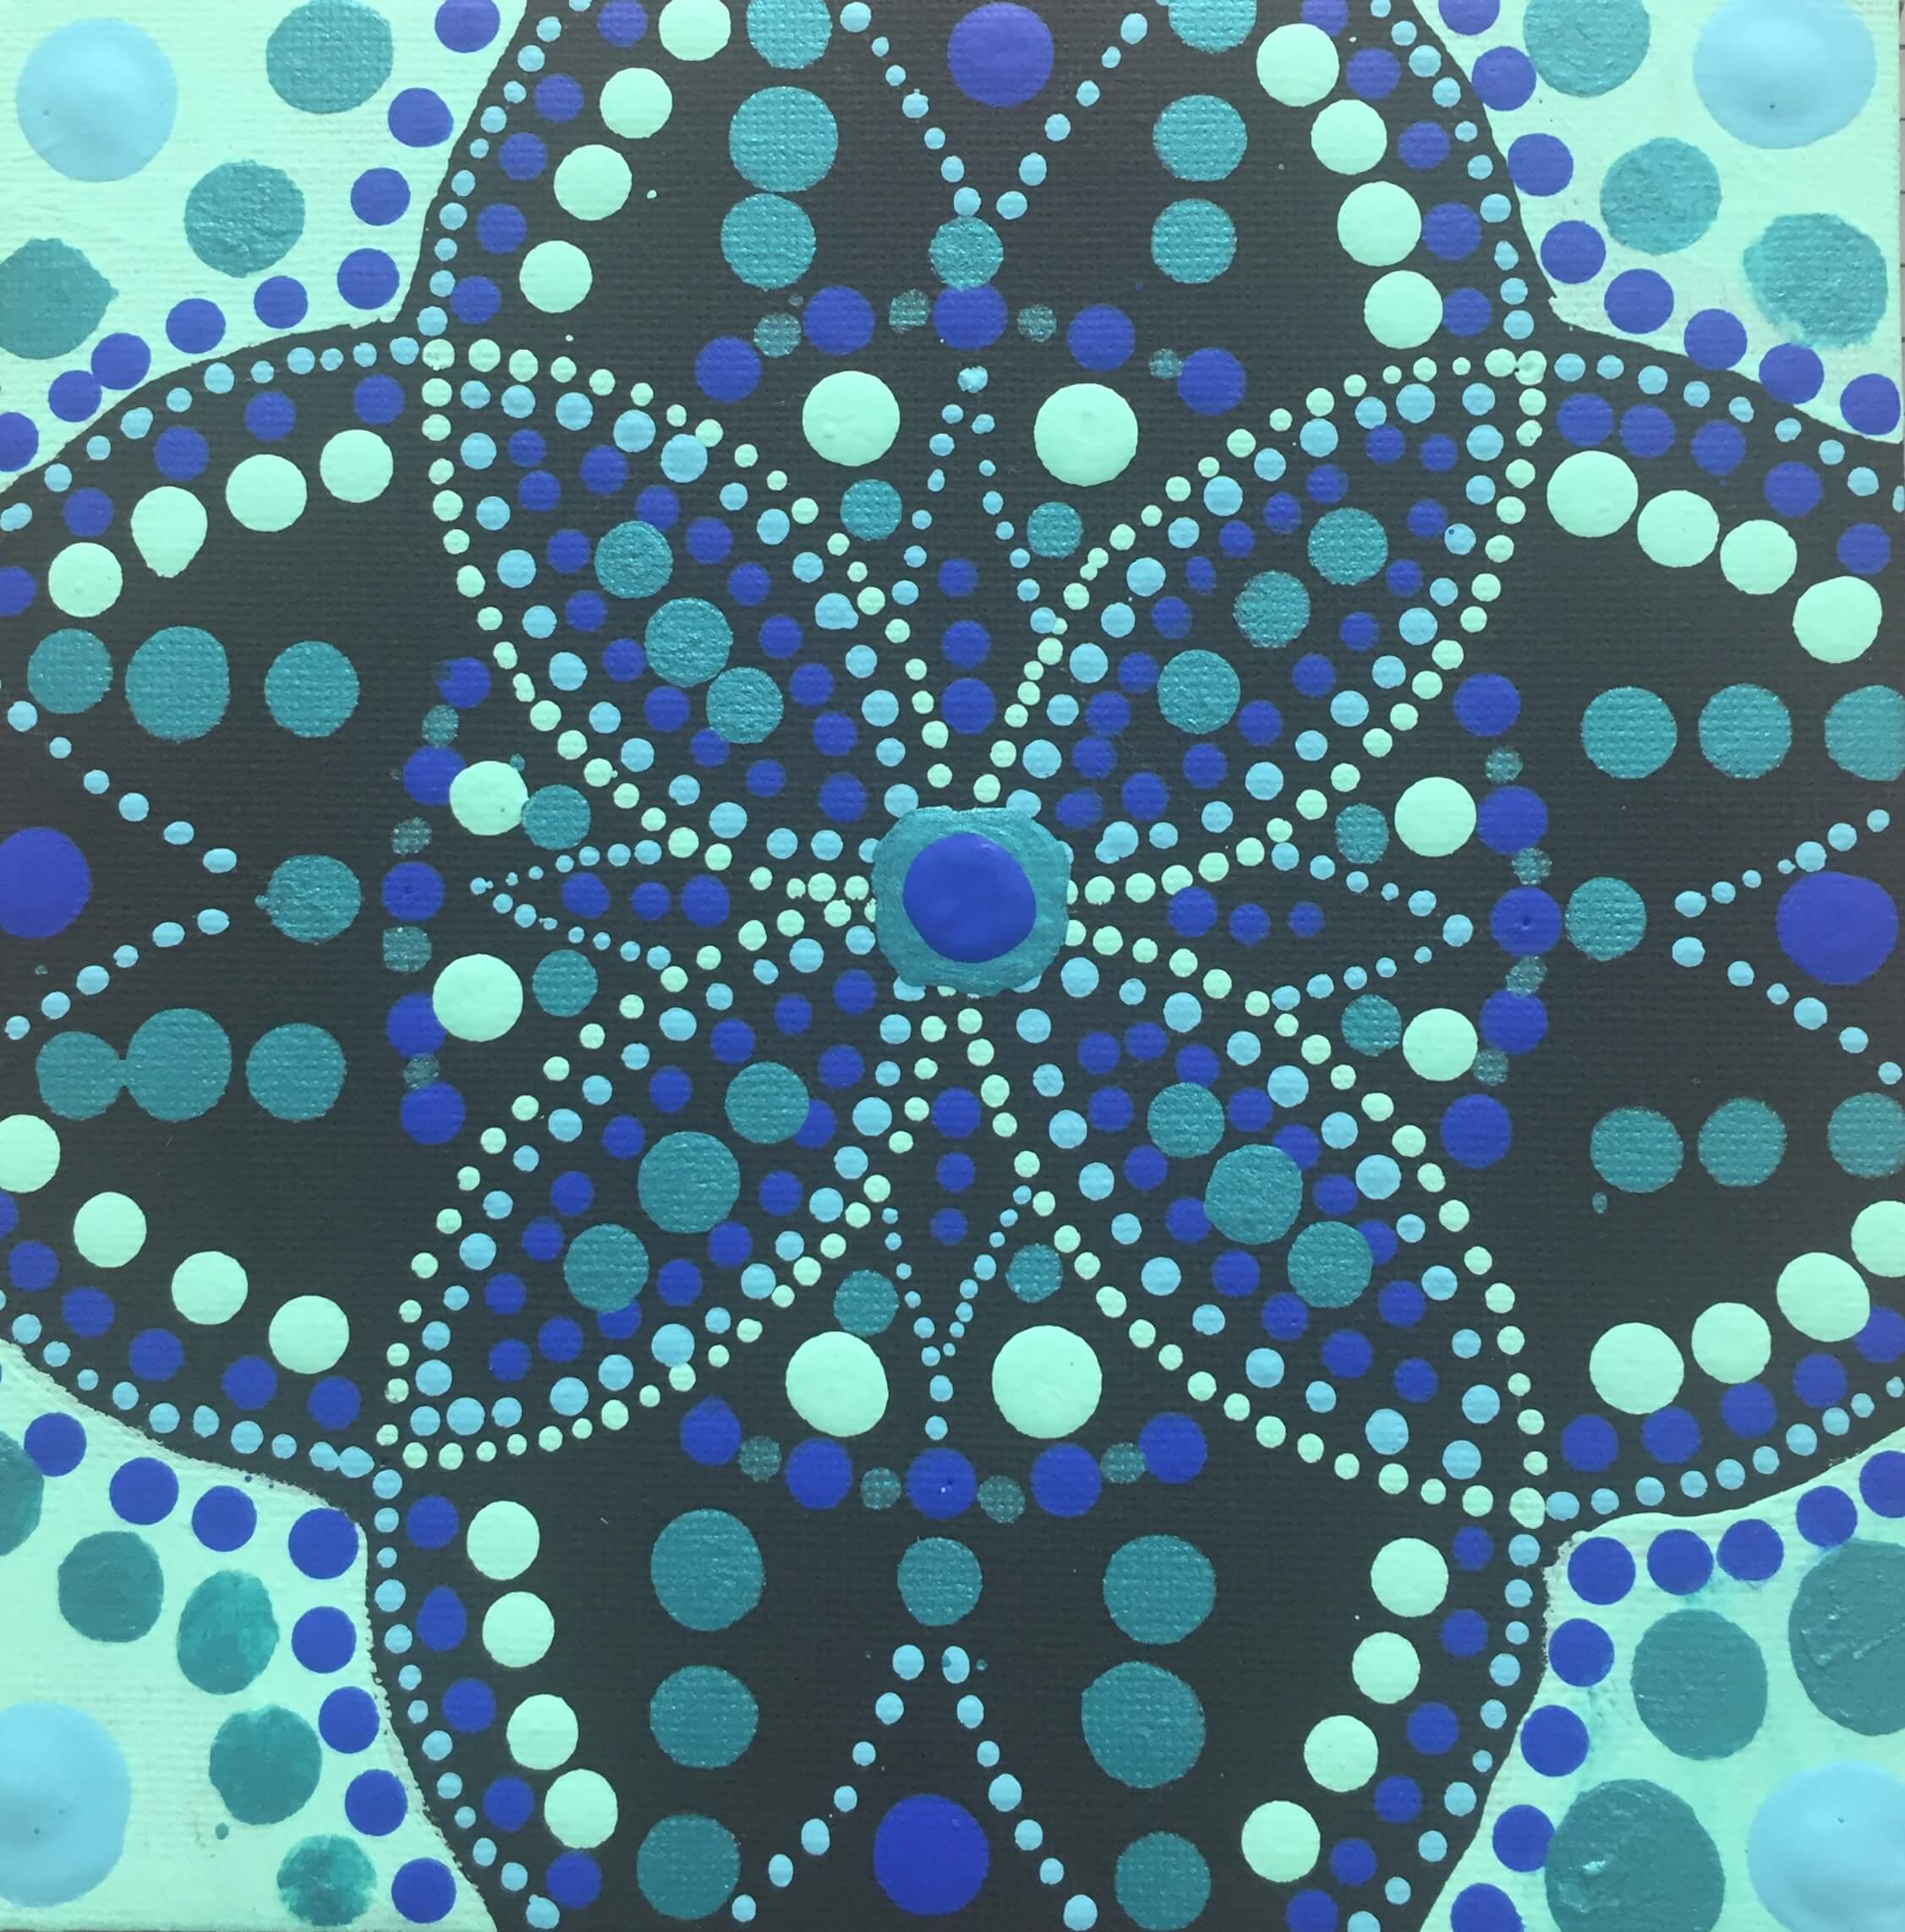 A patterned painting of blue dots and circles